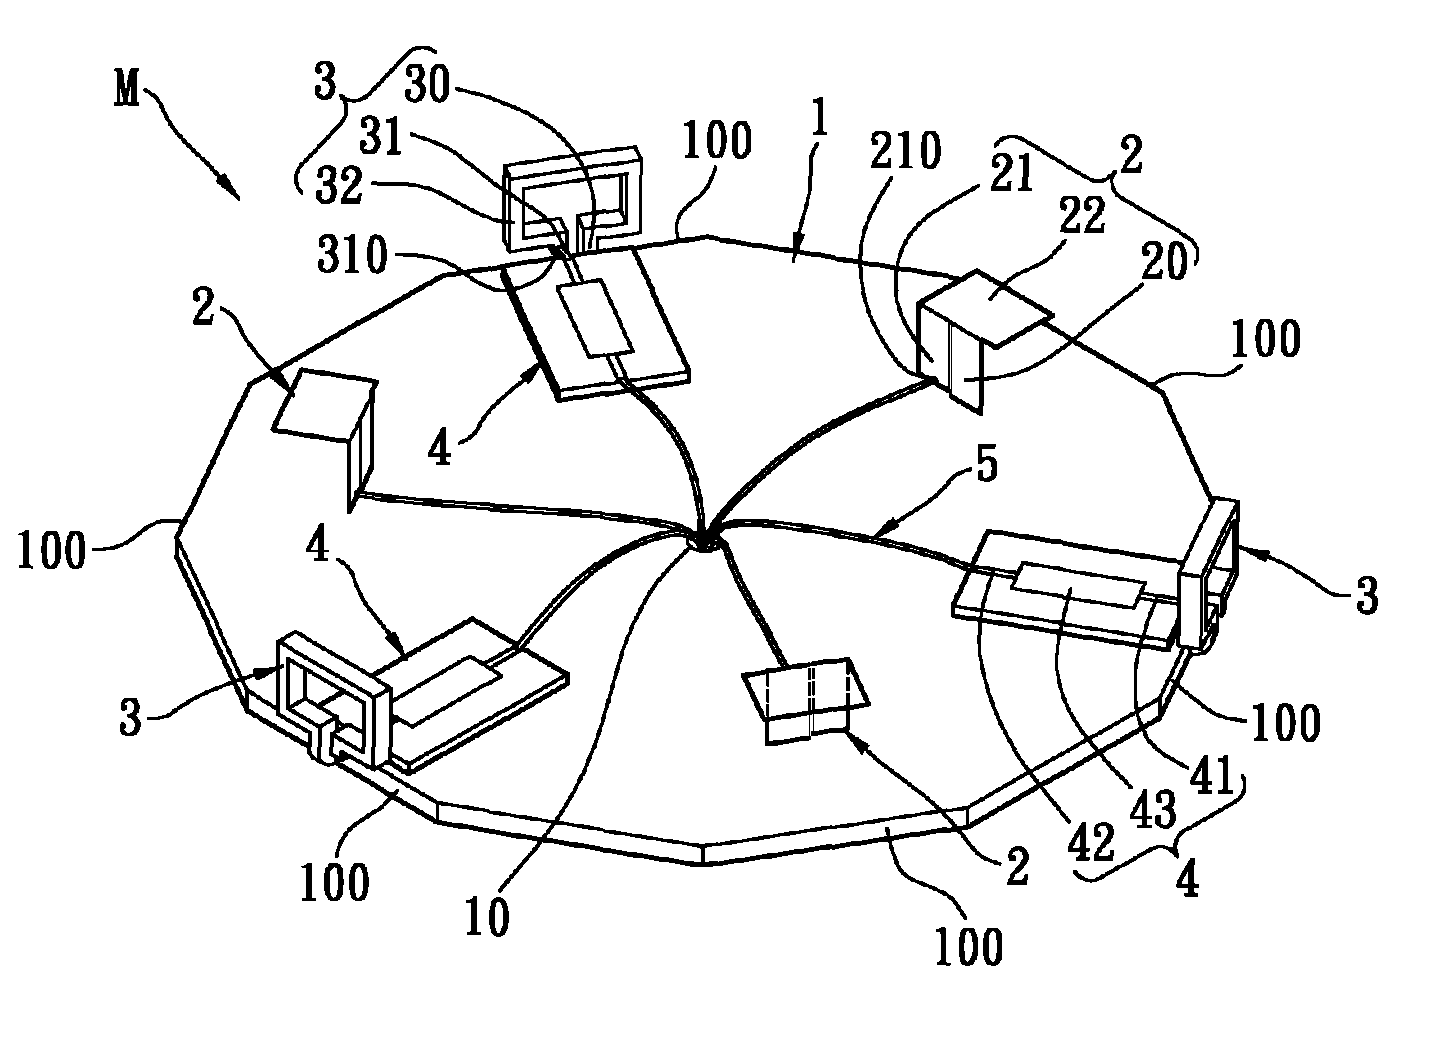 Hybrid multiple-input multiple-output antenna module and system of using the same